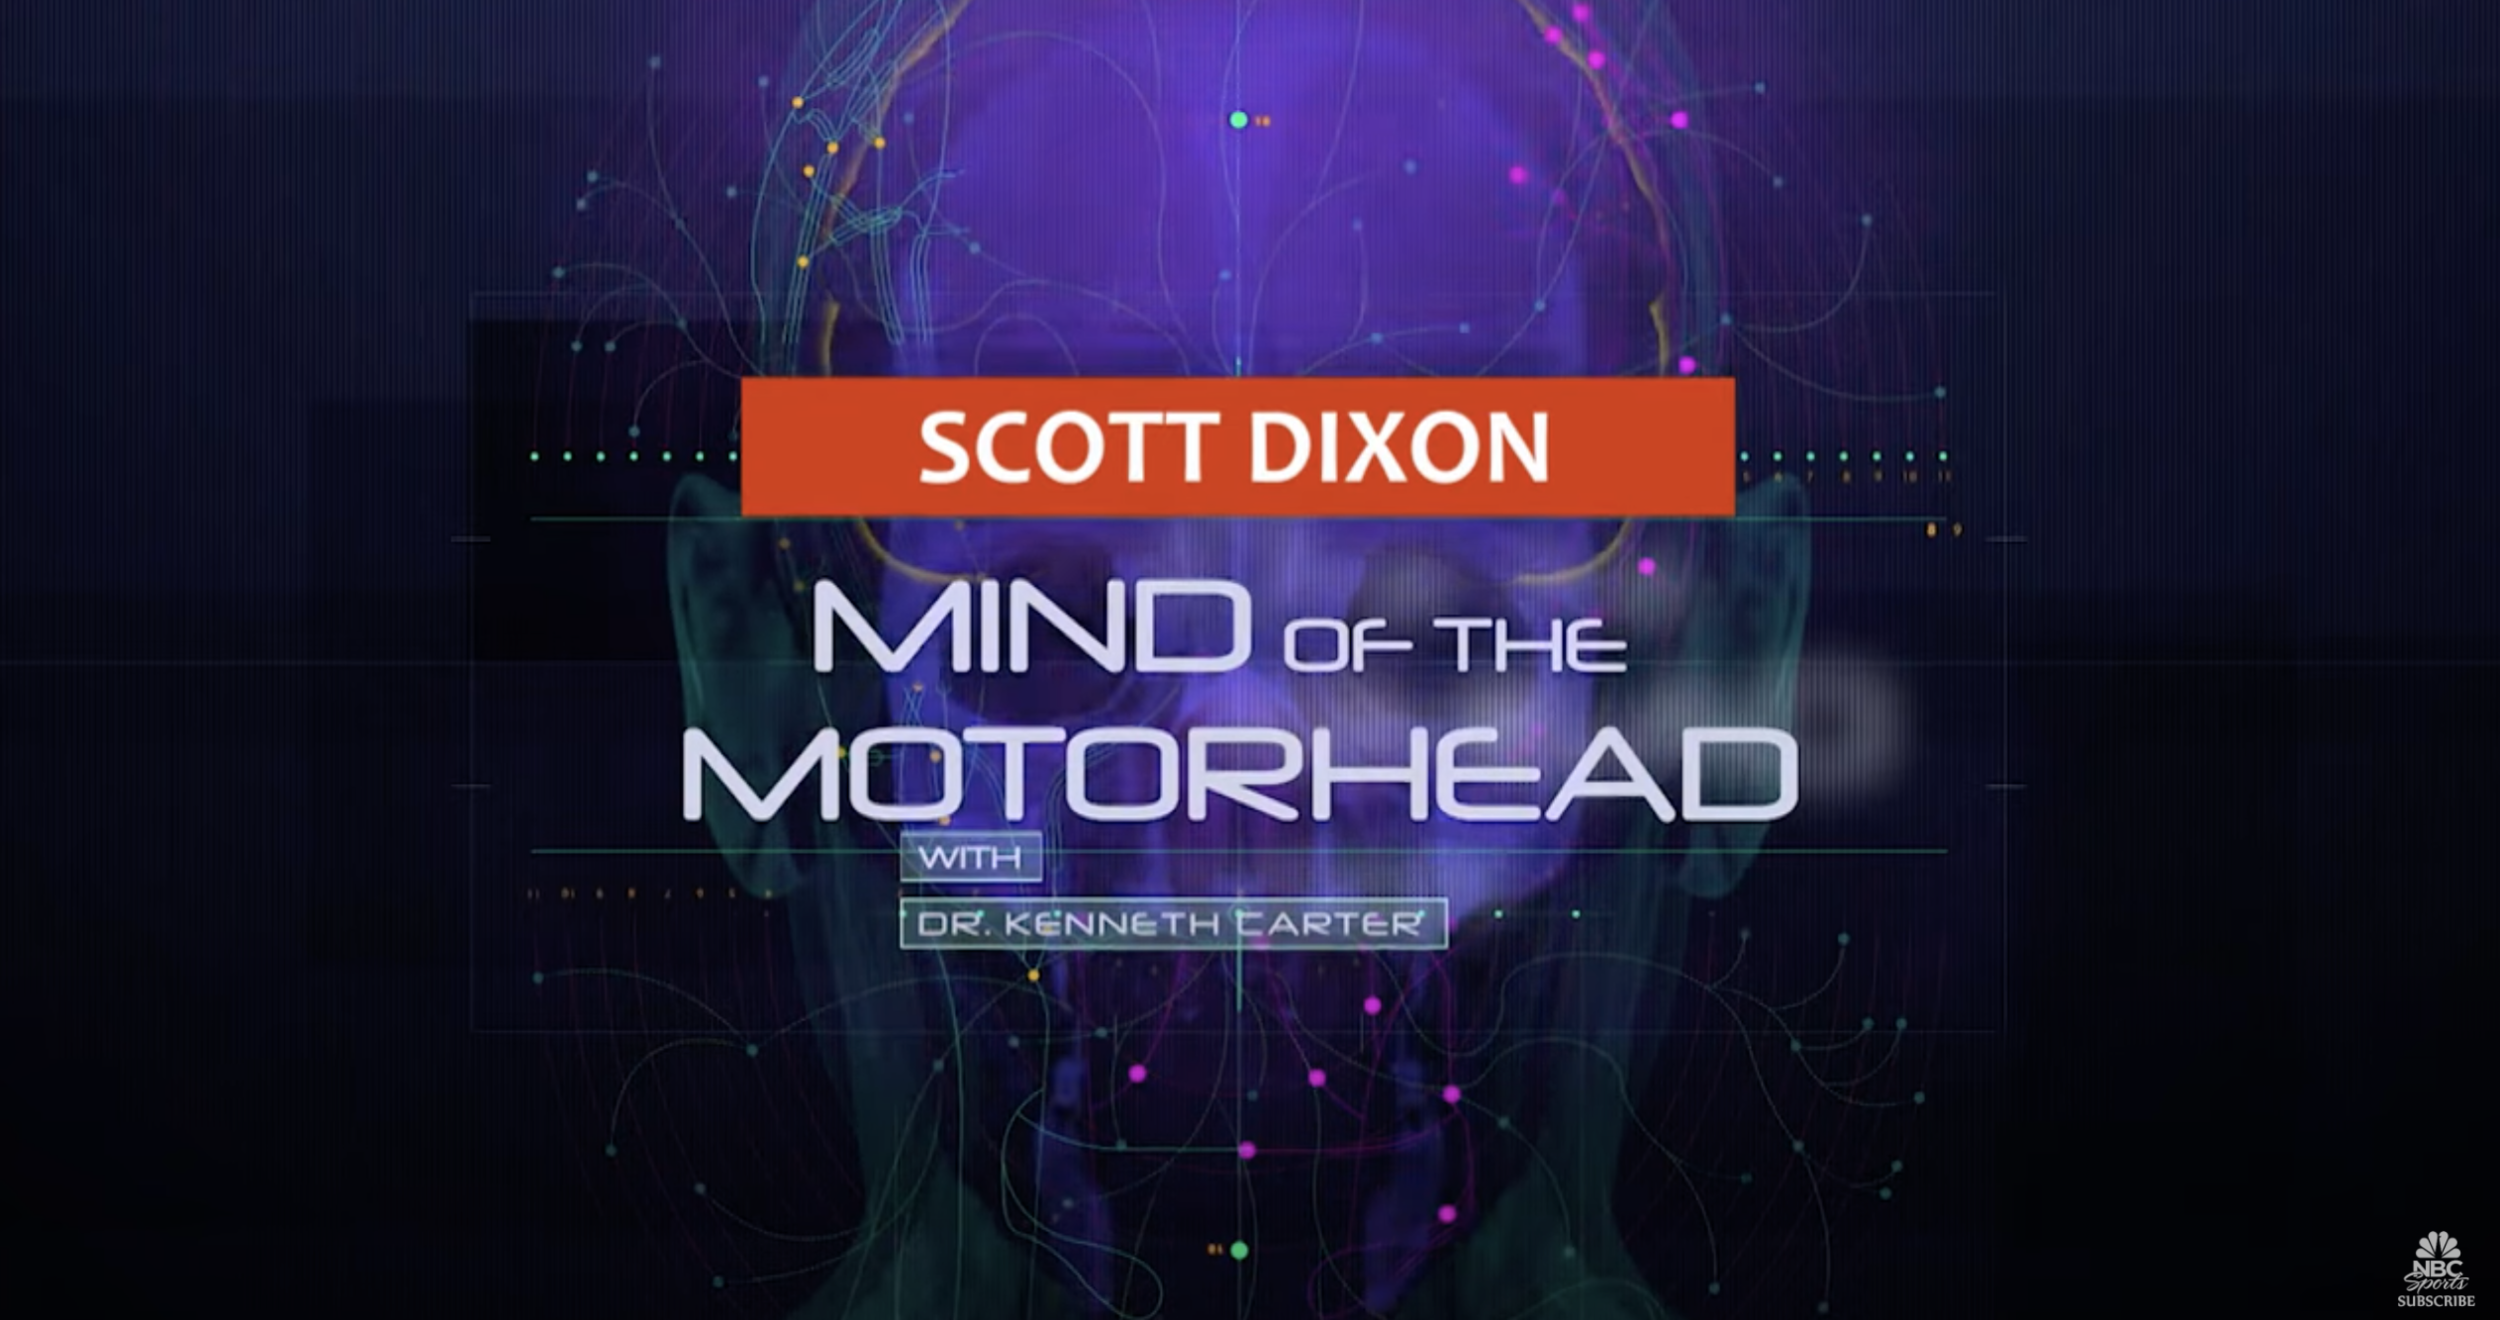 Watch the first episode of Mind of the Motorhead as I interview Scott Dixon